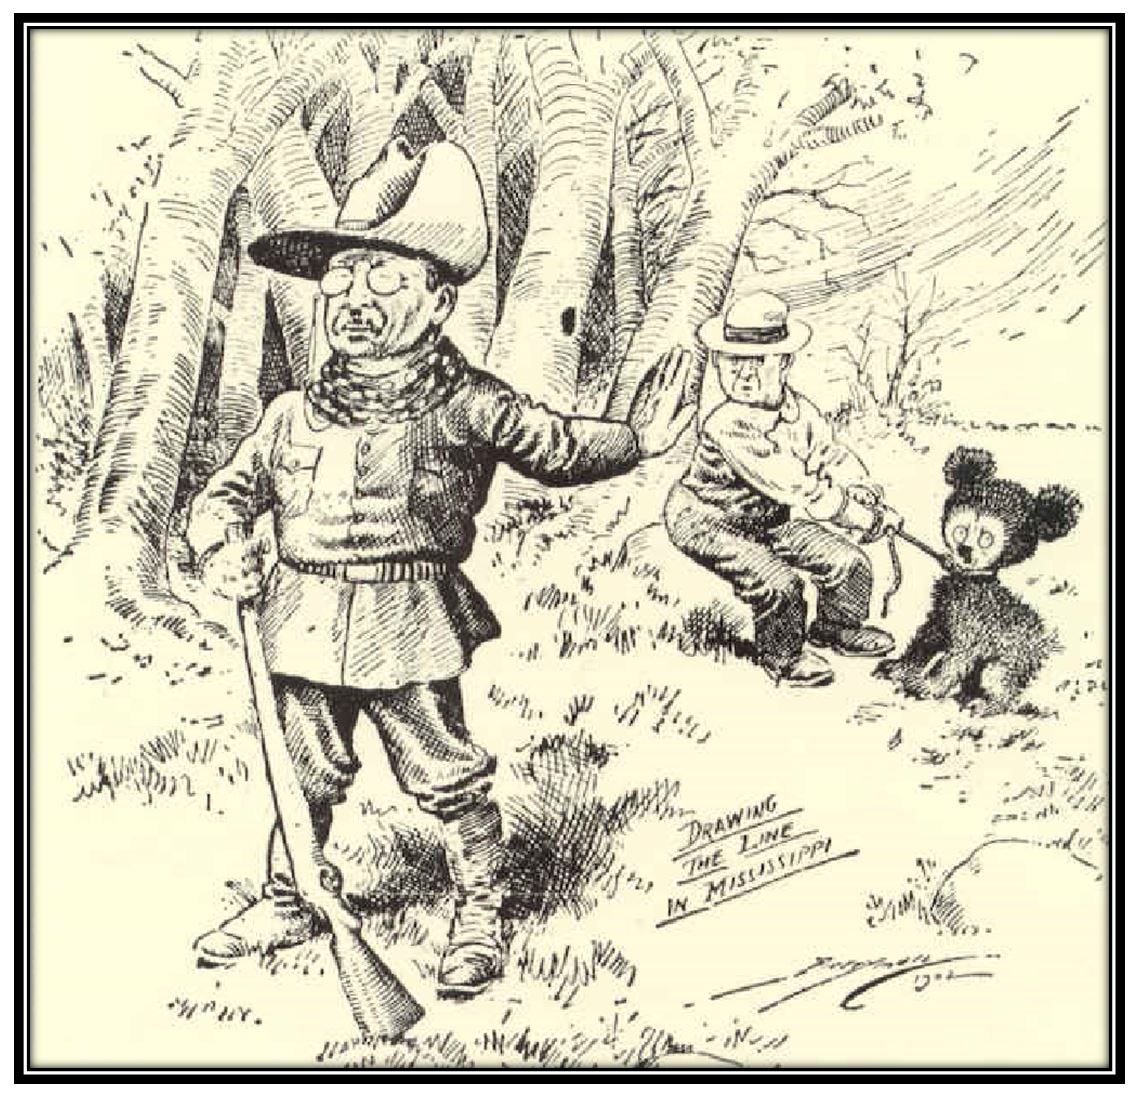 Political cartoon of Roosevelt with his back to the bear